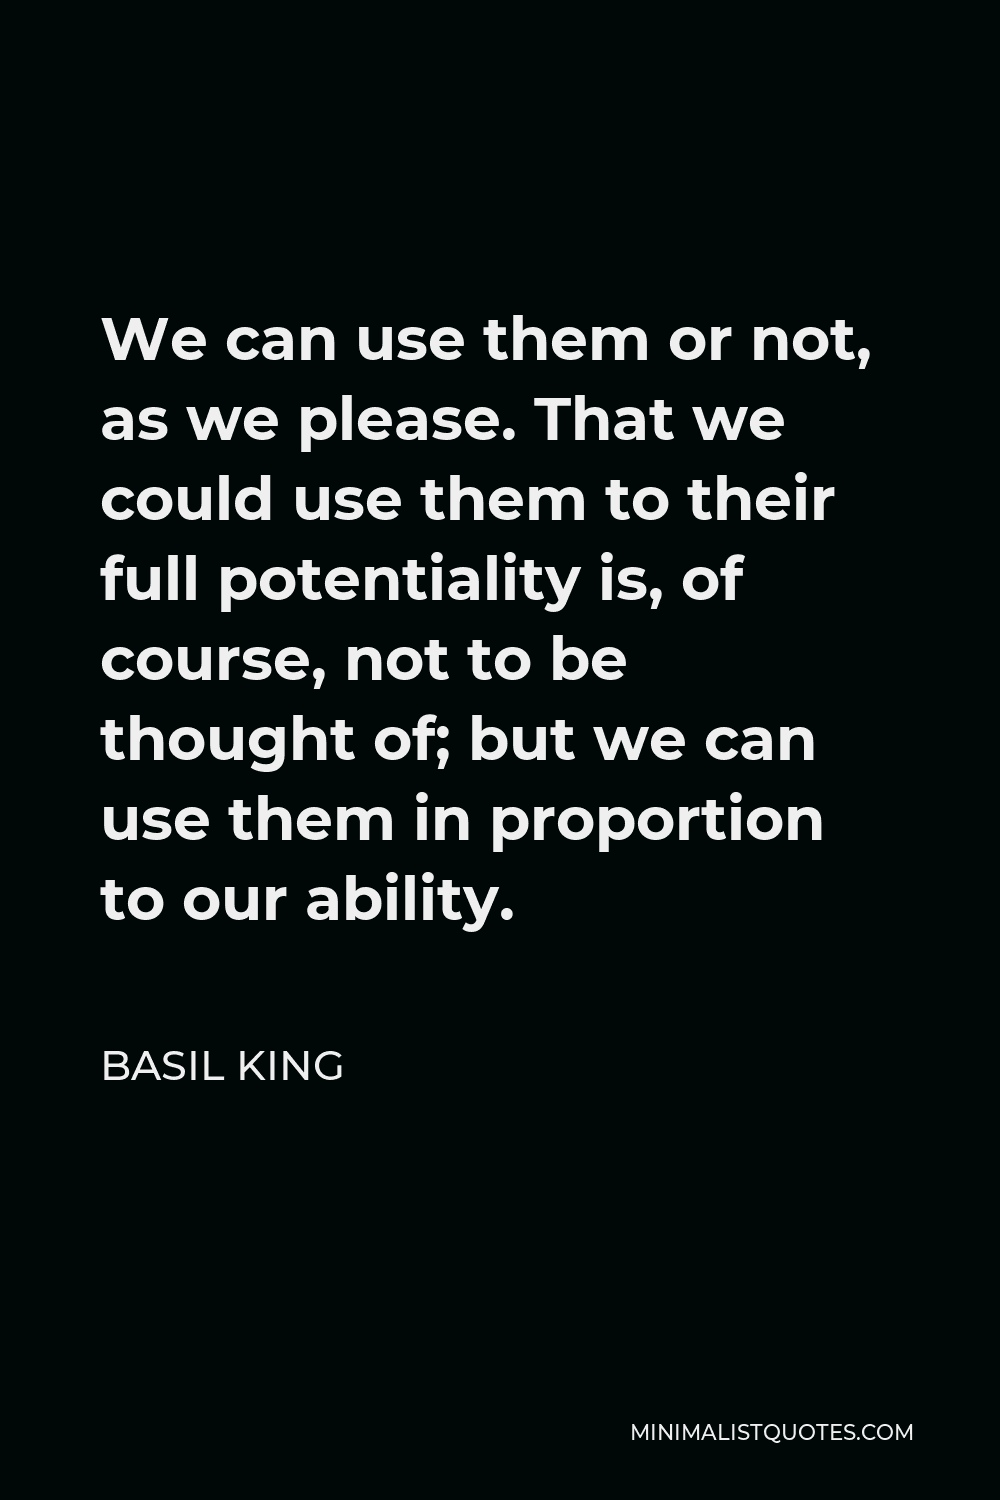 Basil King Quote - We can use them or not, as we please. That we could use them to their full potentiality is, of course, not to be thought of; but we can use them in proportion to our ability.